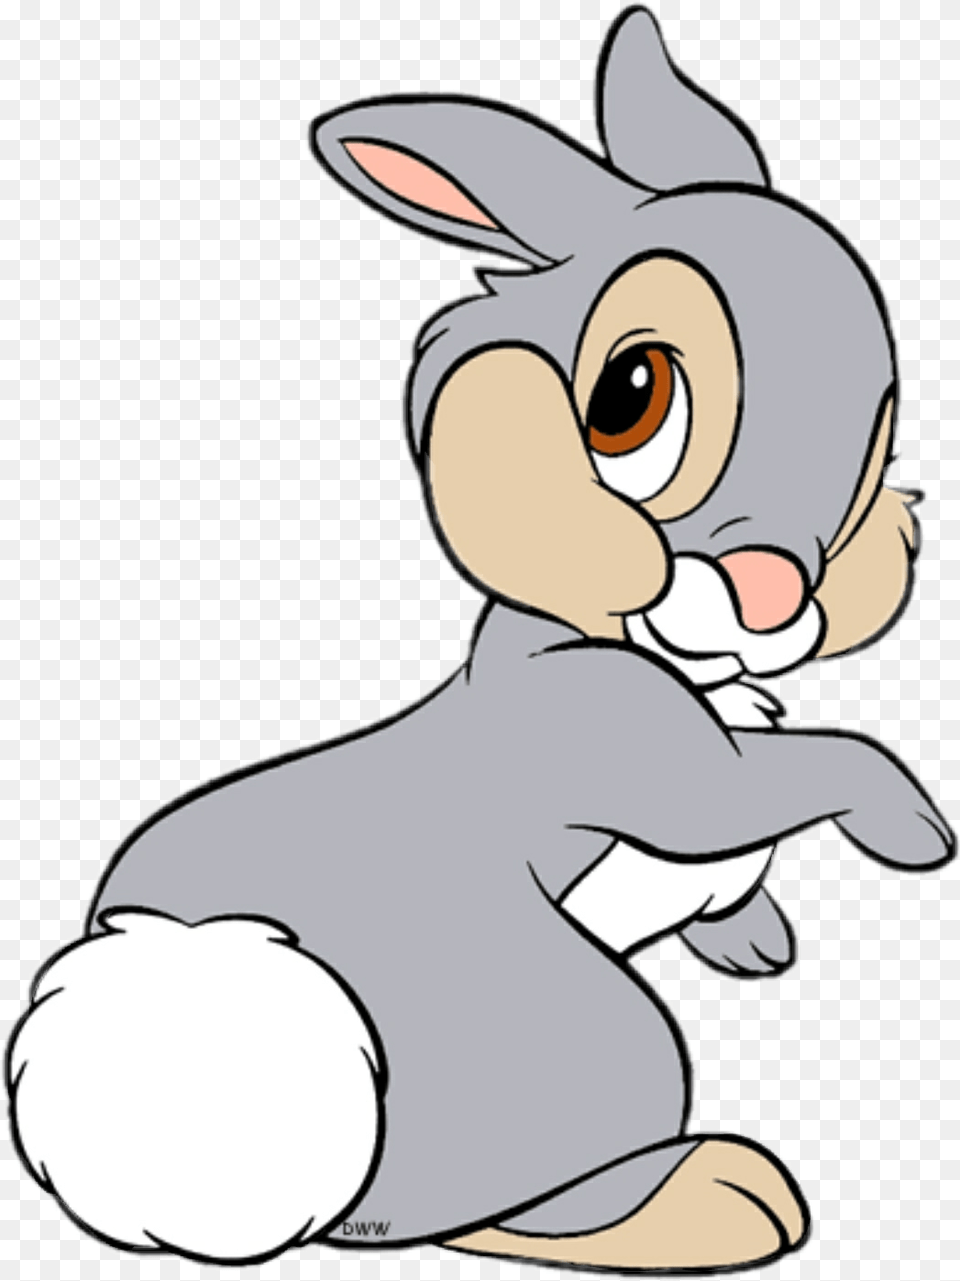 Sticker Thumper Disney Cute Cute Thumper Drawings, Cartoon, Baby, Person, Animal Png Image